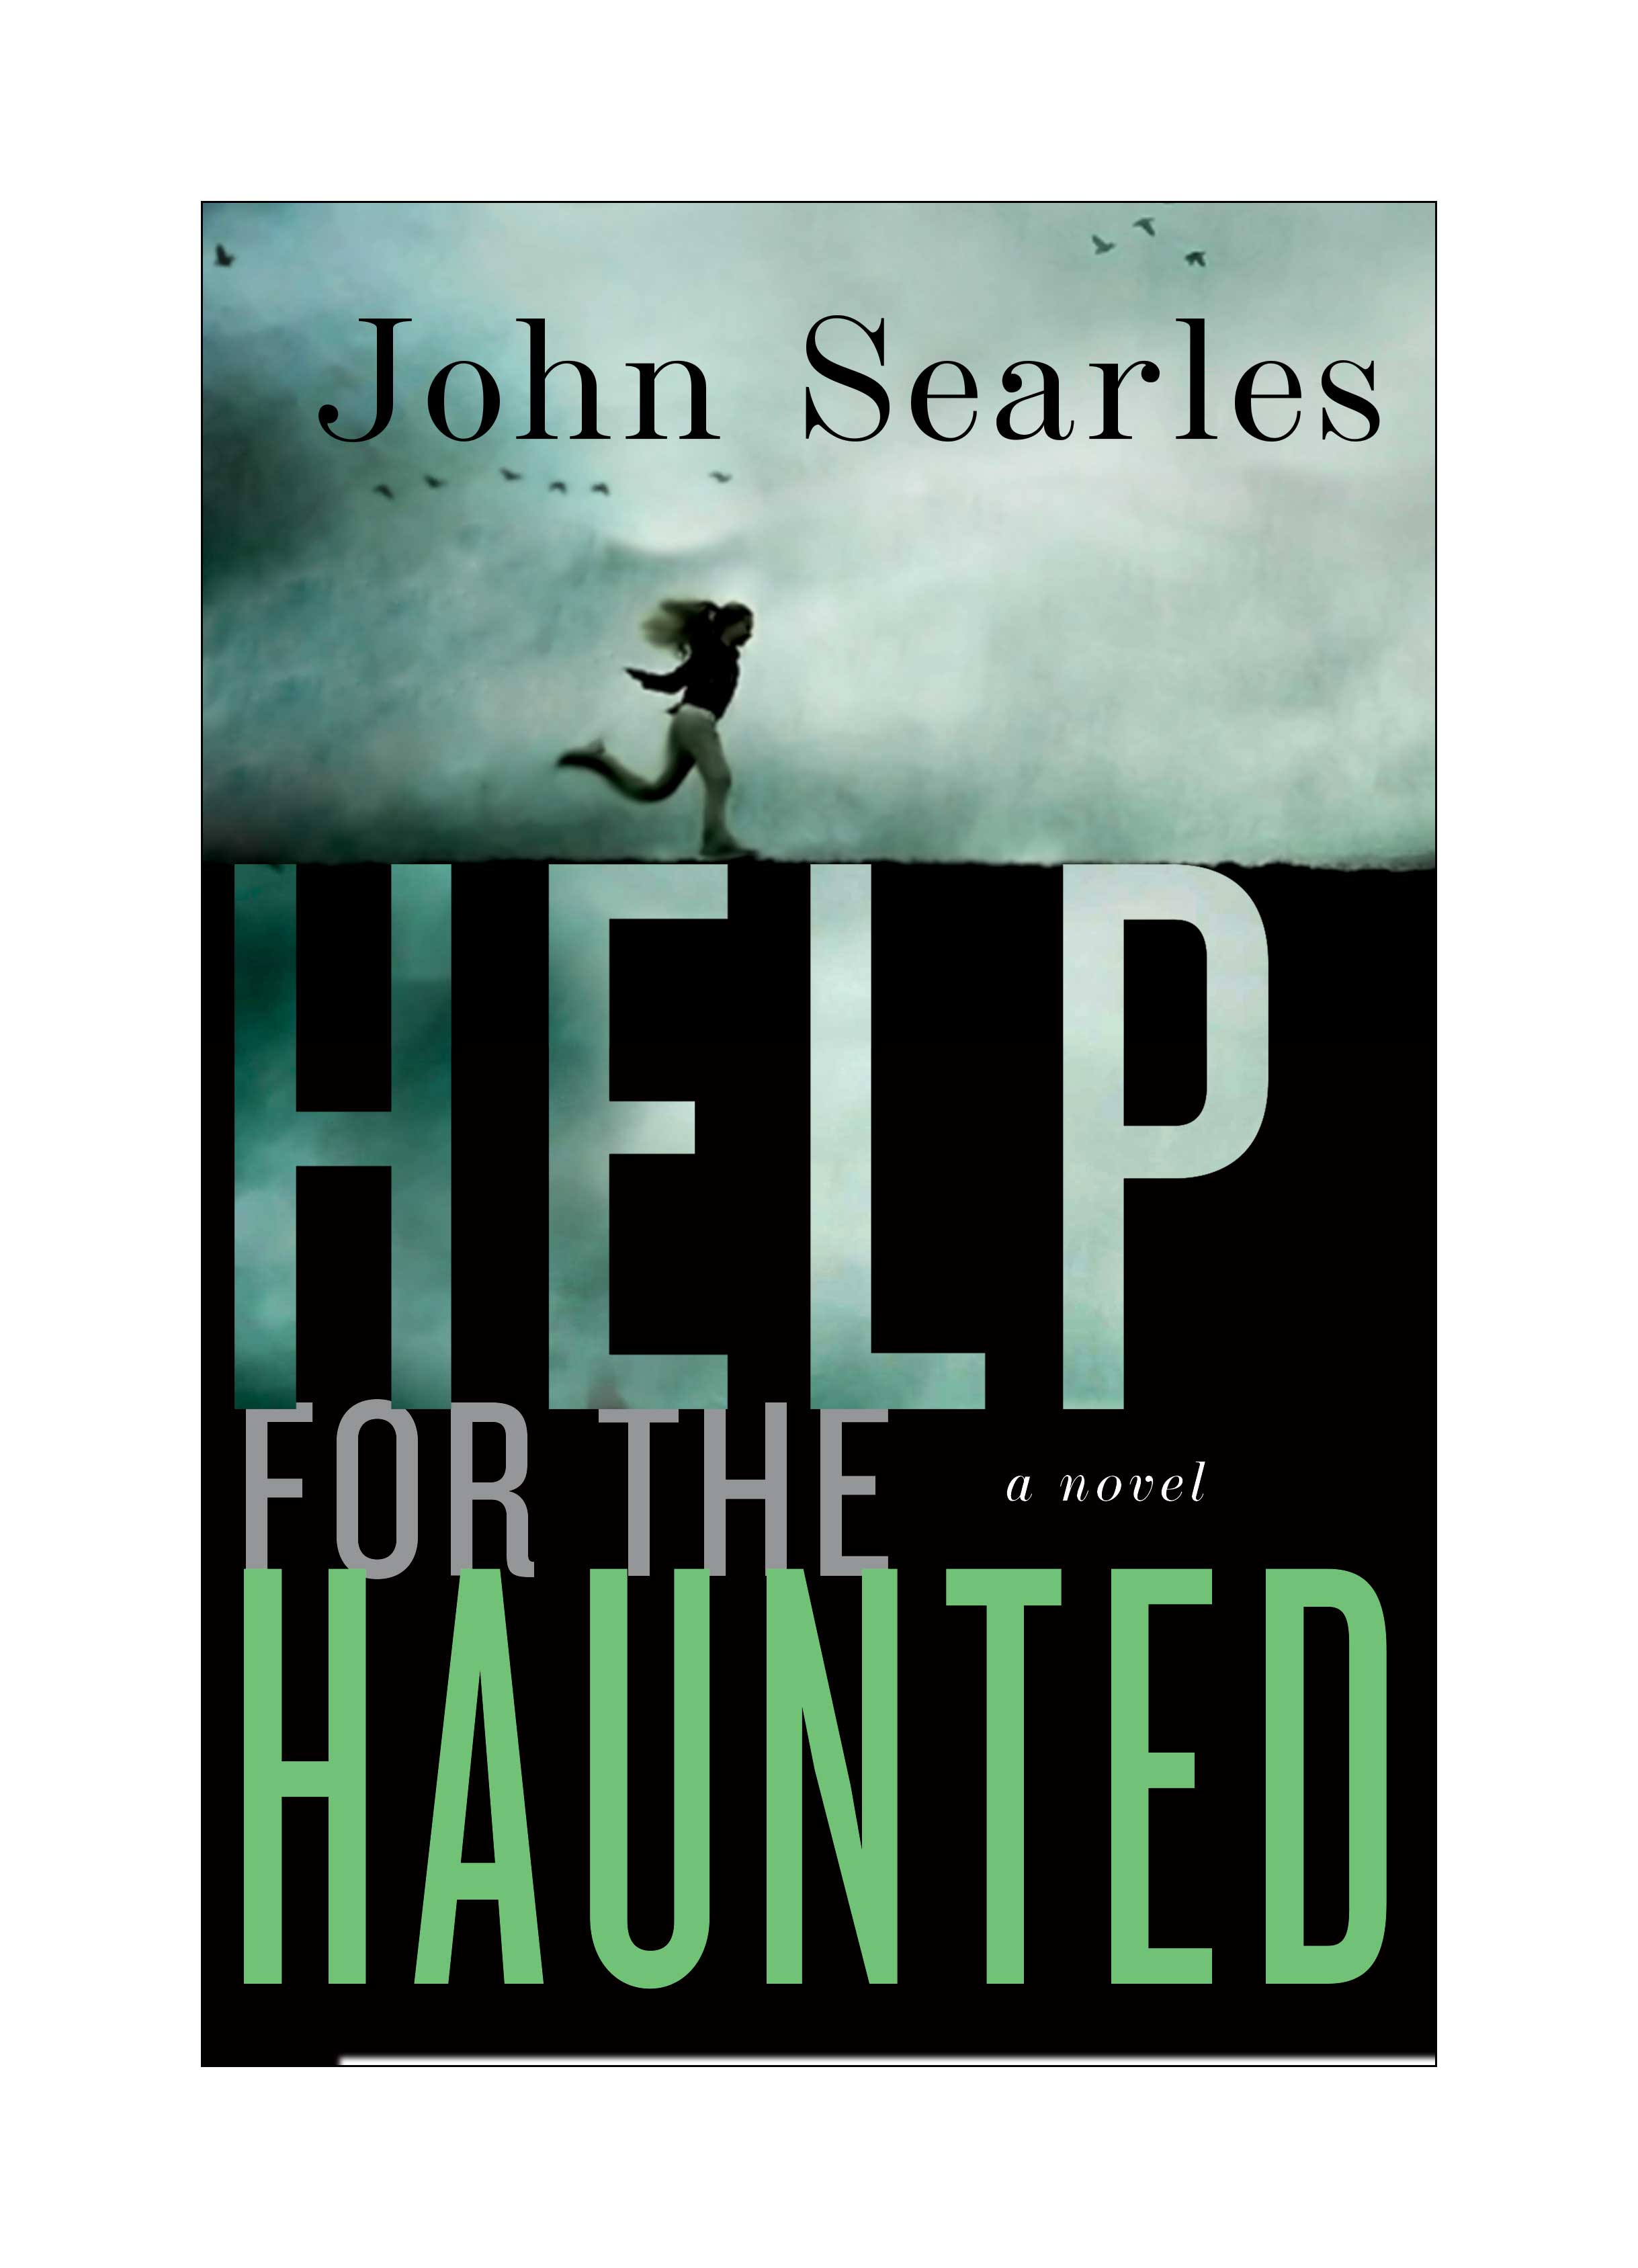 Author John Searles Visits SLCL on 9/27